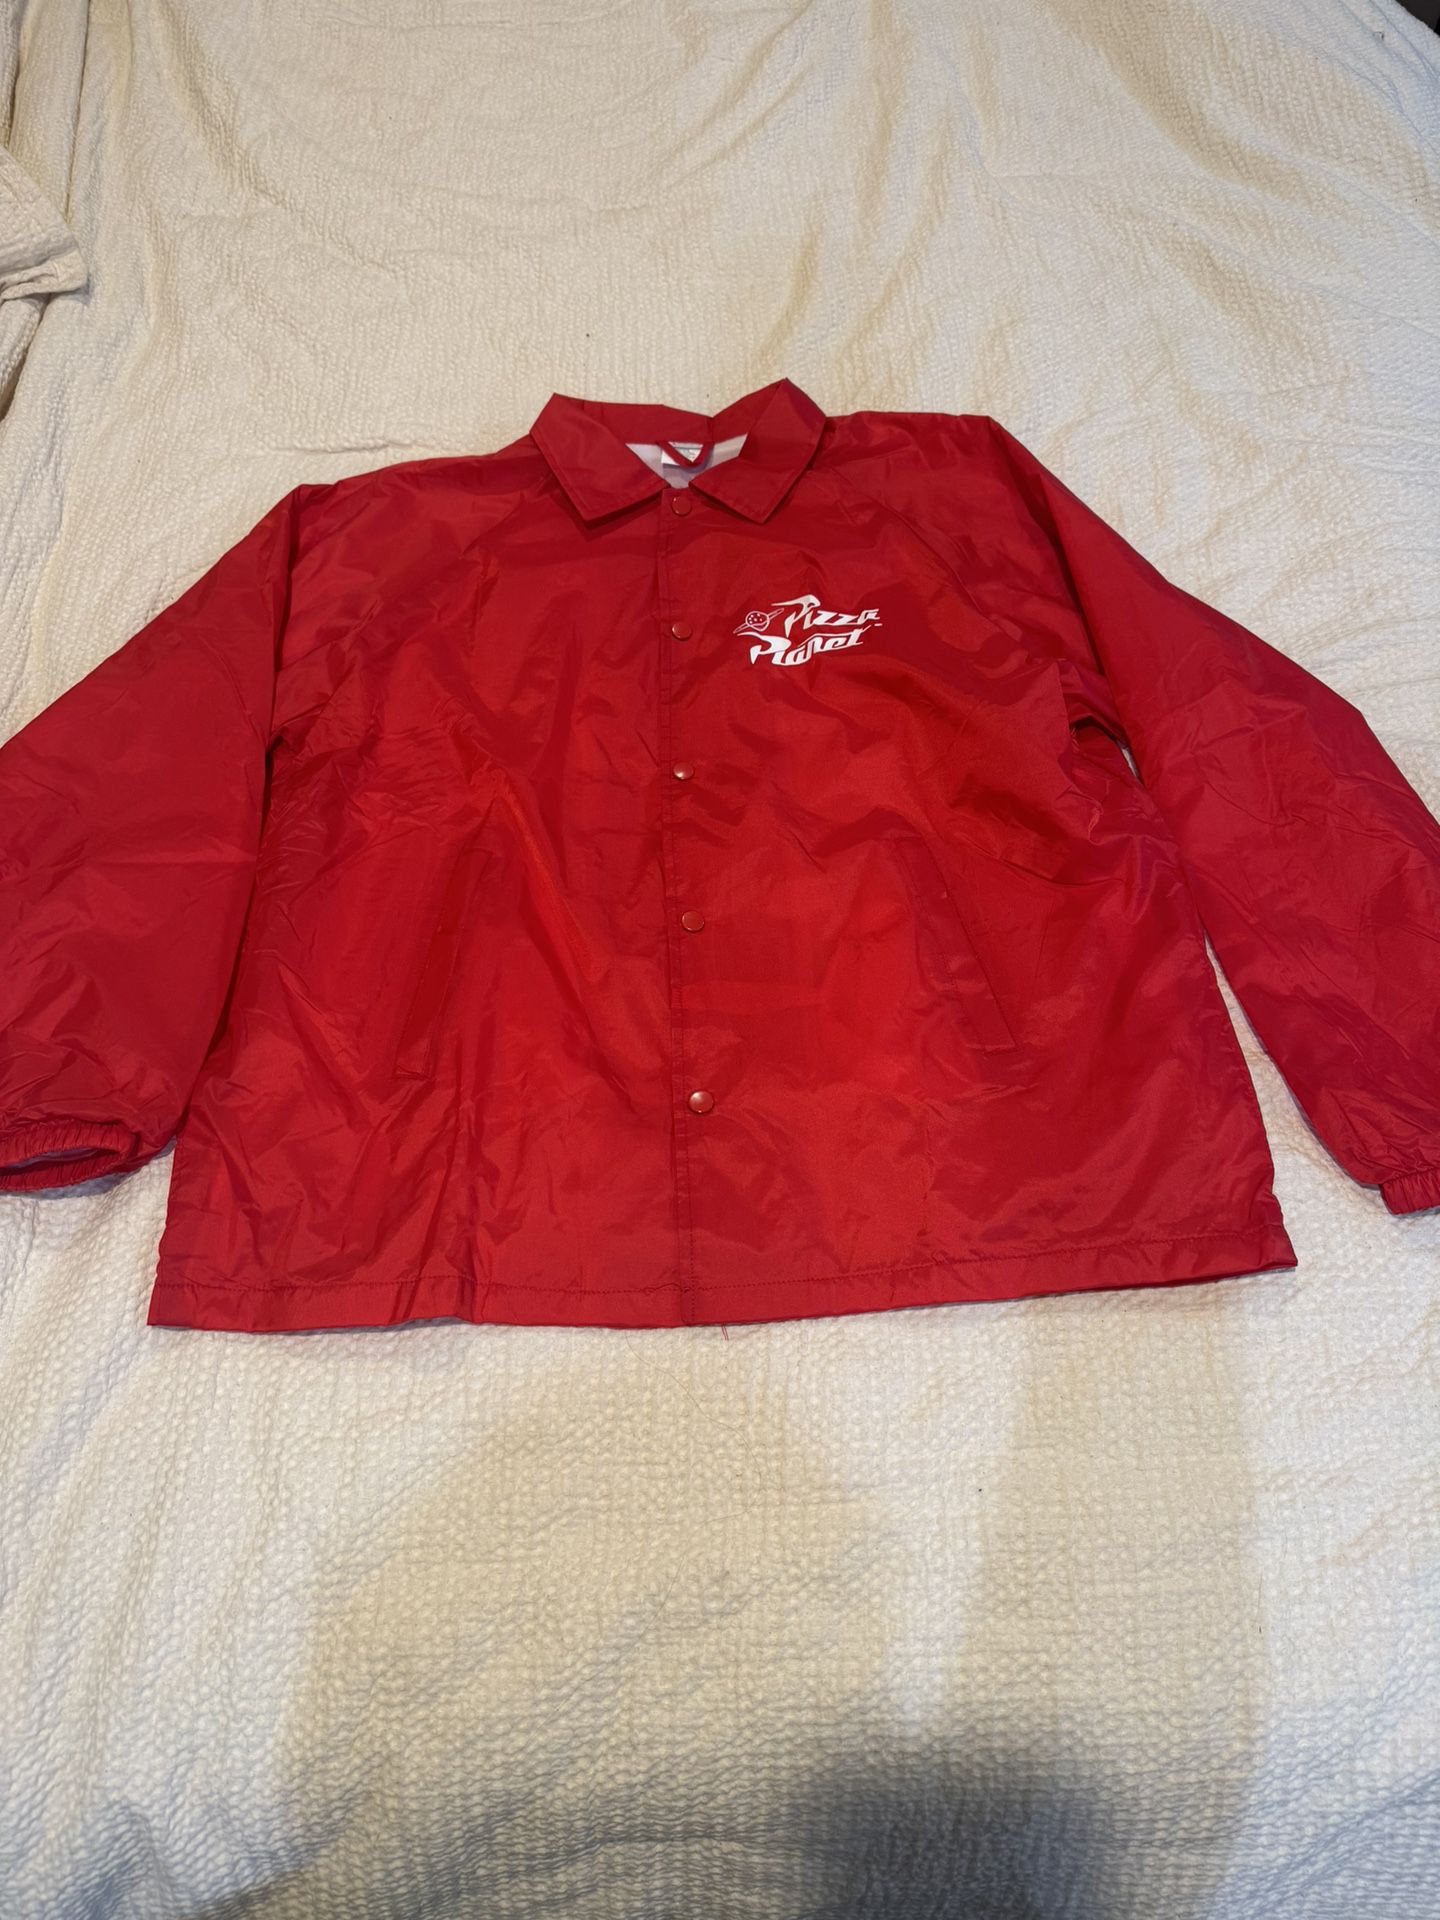 Toy Story - Pizza Planet Windbreaker  Large